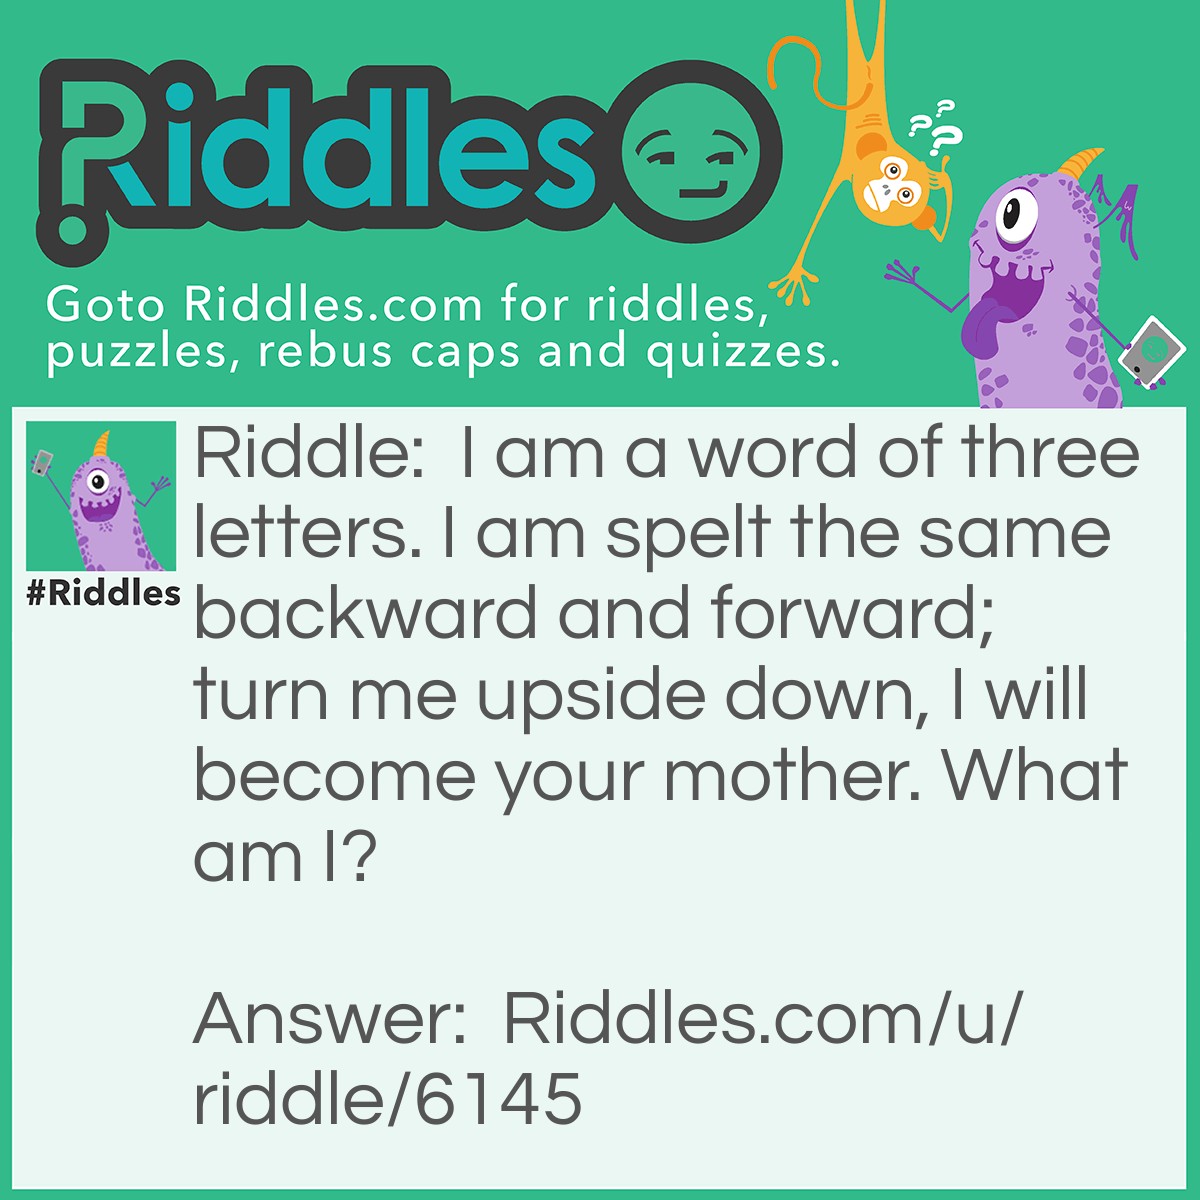 Riddle: I am a word of three letters. I am spelt the same backward and forward; turn me upside down, I will become your mother. What am I? Answer: WOW.